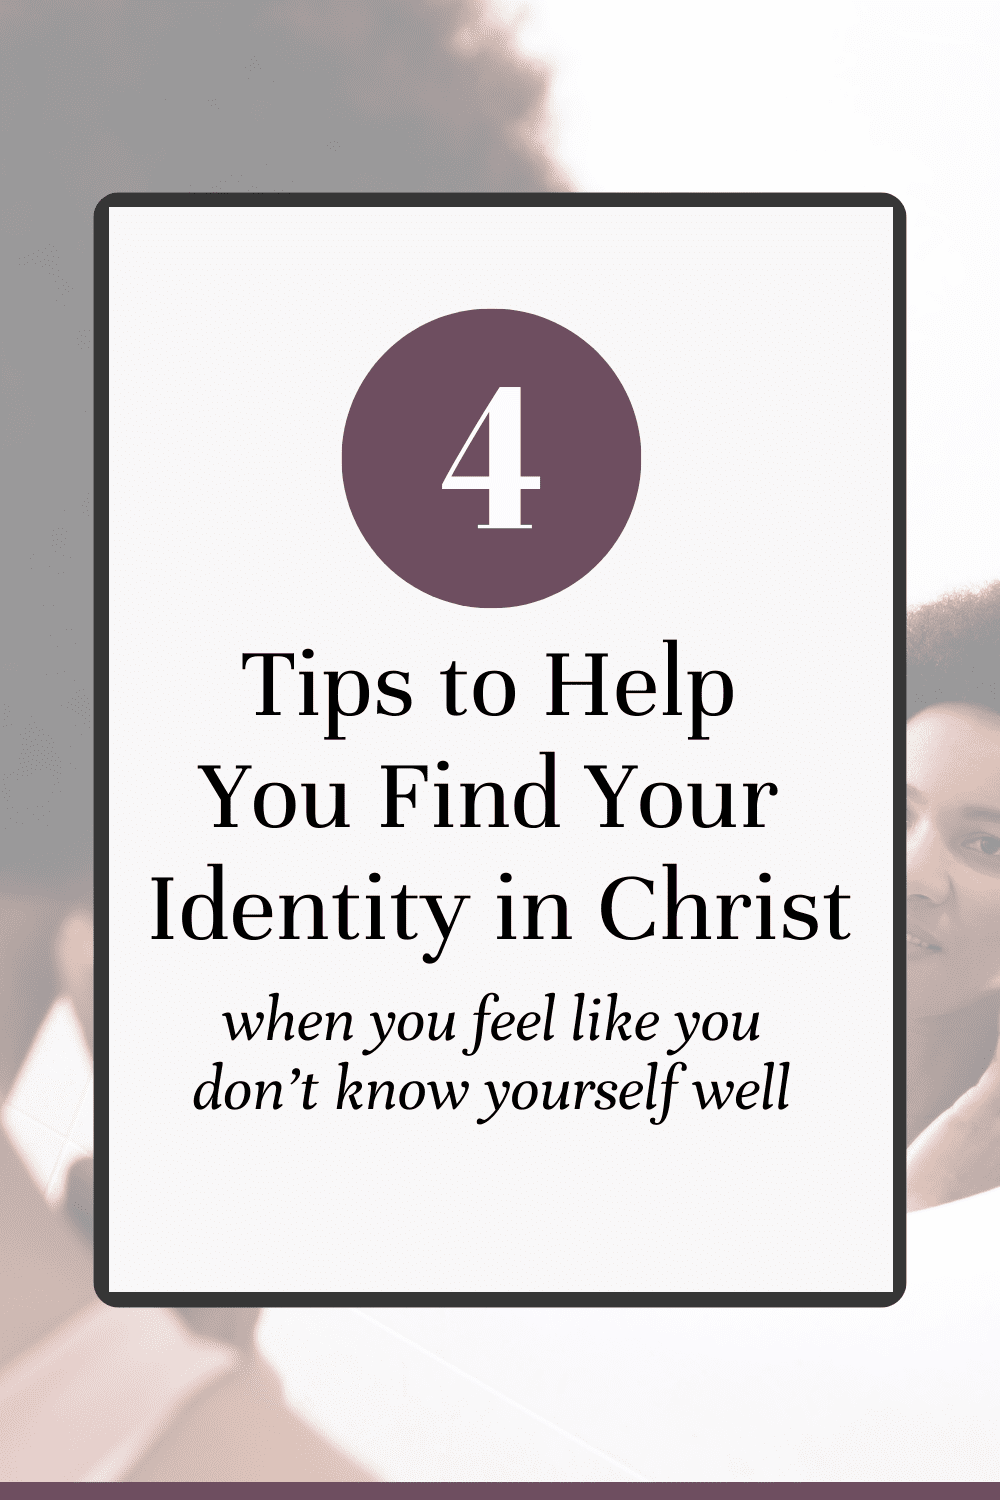 Are you struggling to know yourself? Learn these four tips to help you find your identity in Christ. Through daily quiet time in prayer and bible study you can discover who you are- without having to depend on culture to tell you.